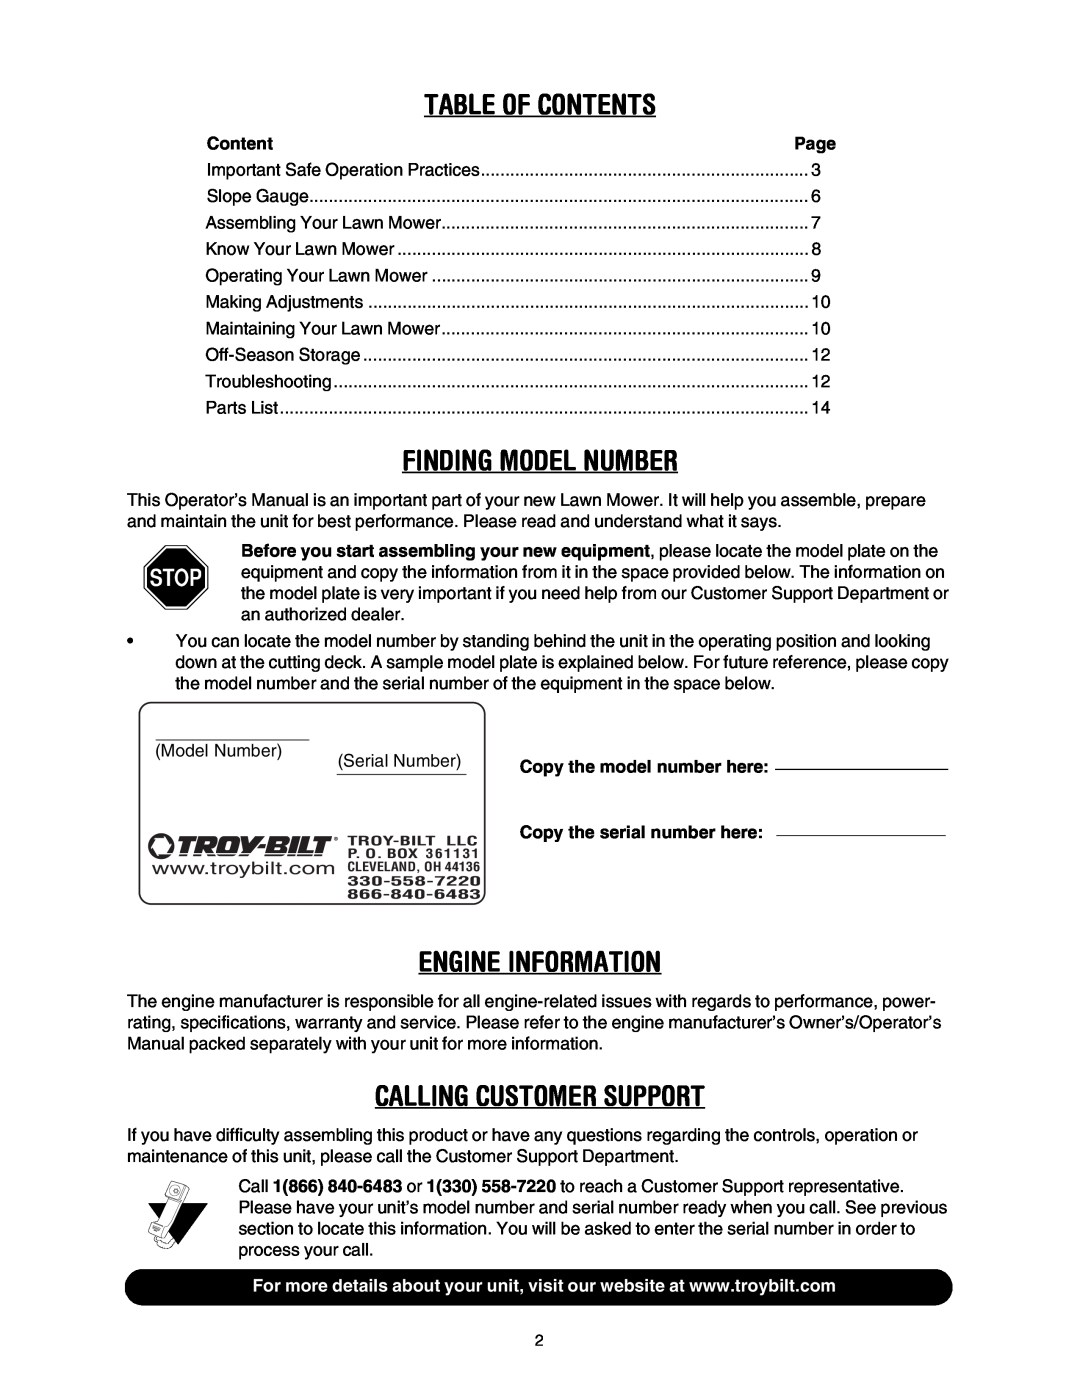 Troy-Bilt 106 manual Table Of Contents, Finding Model Number, Engine Information, Calling Customer Support 